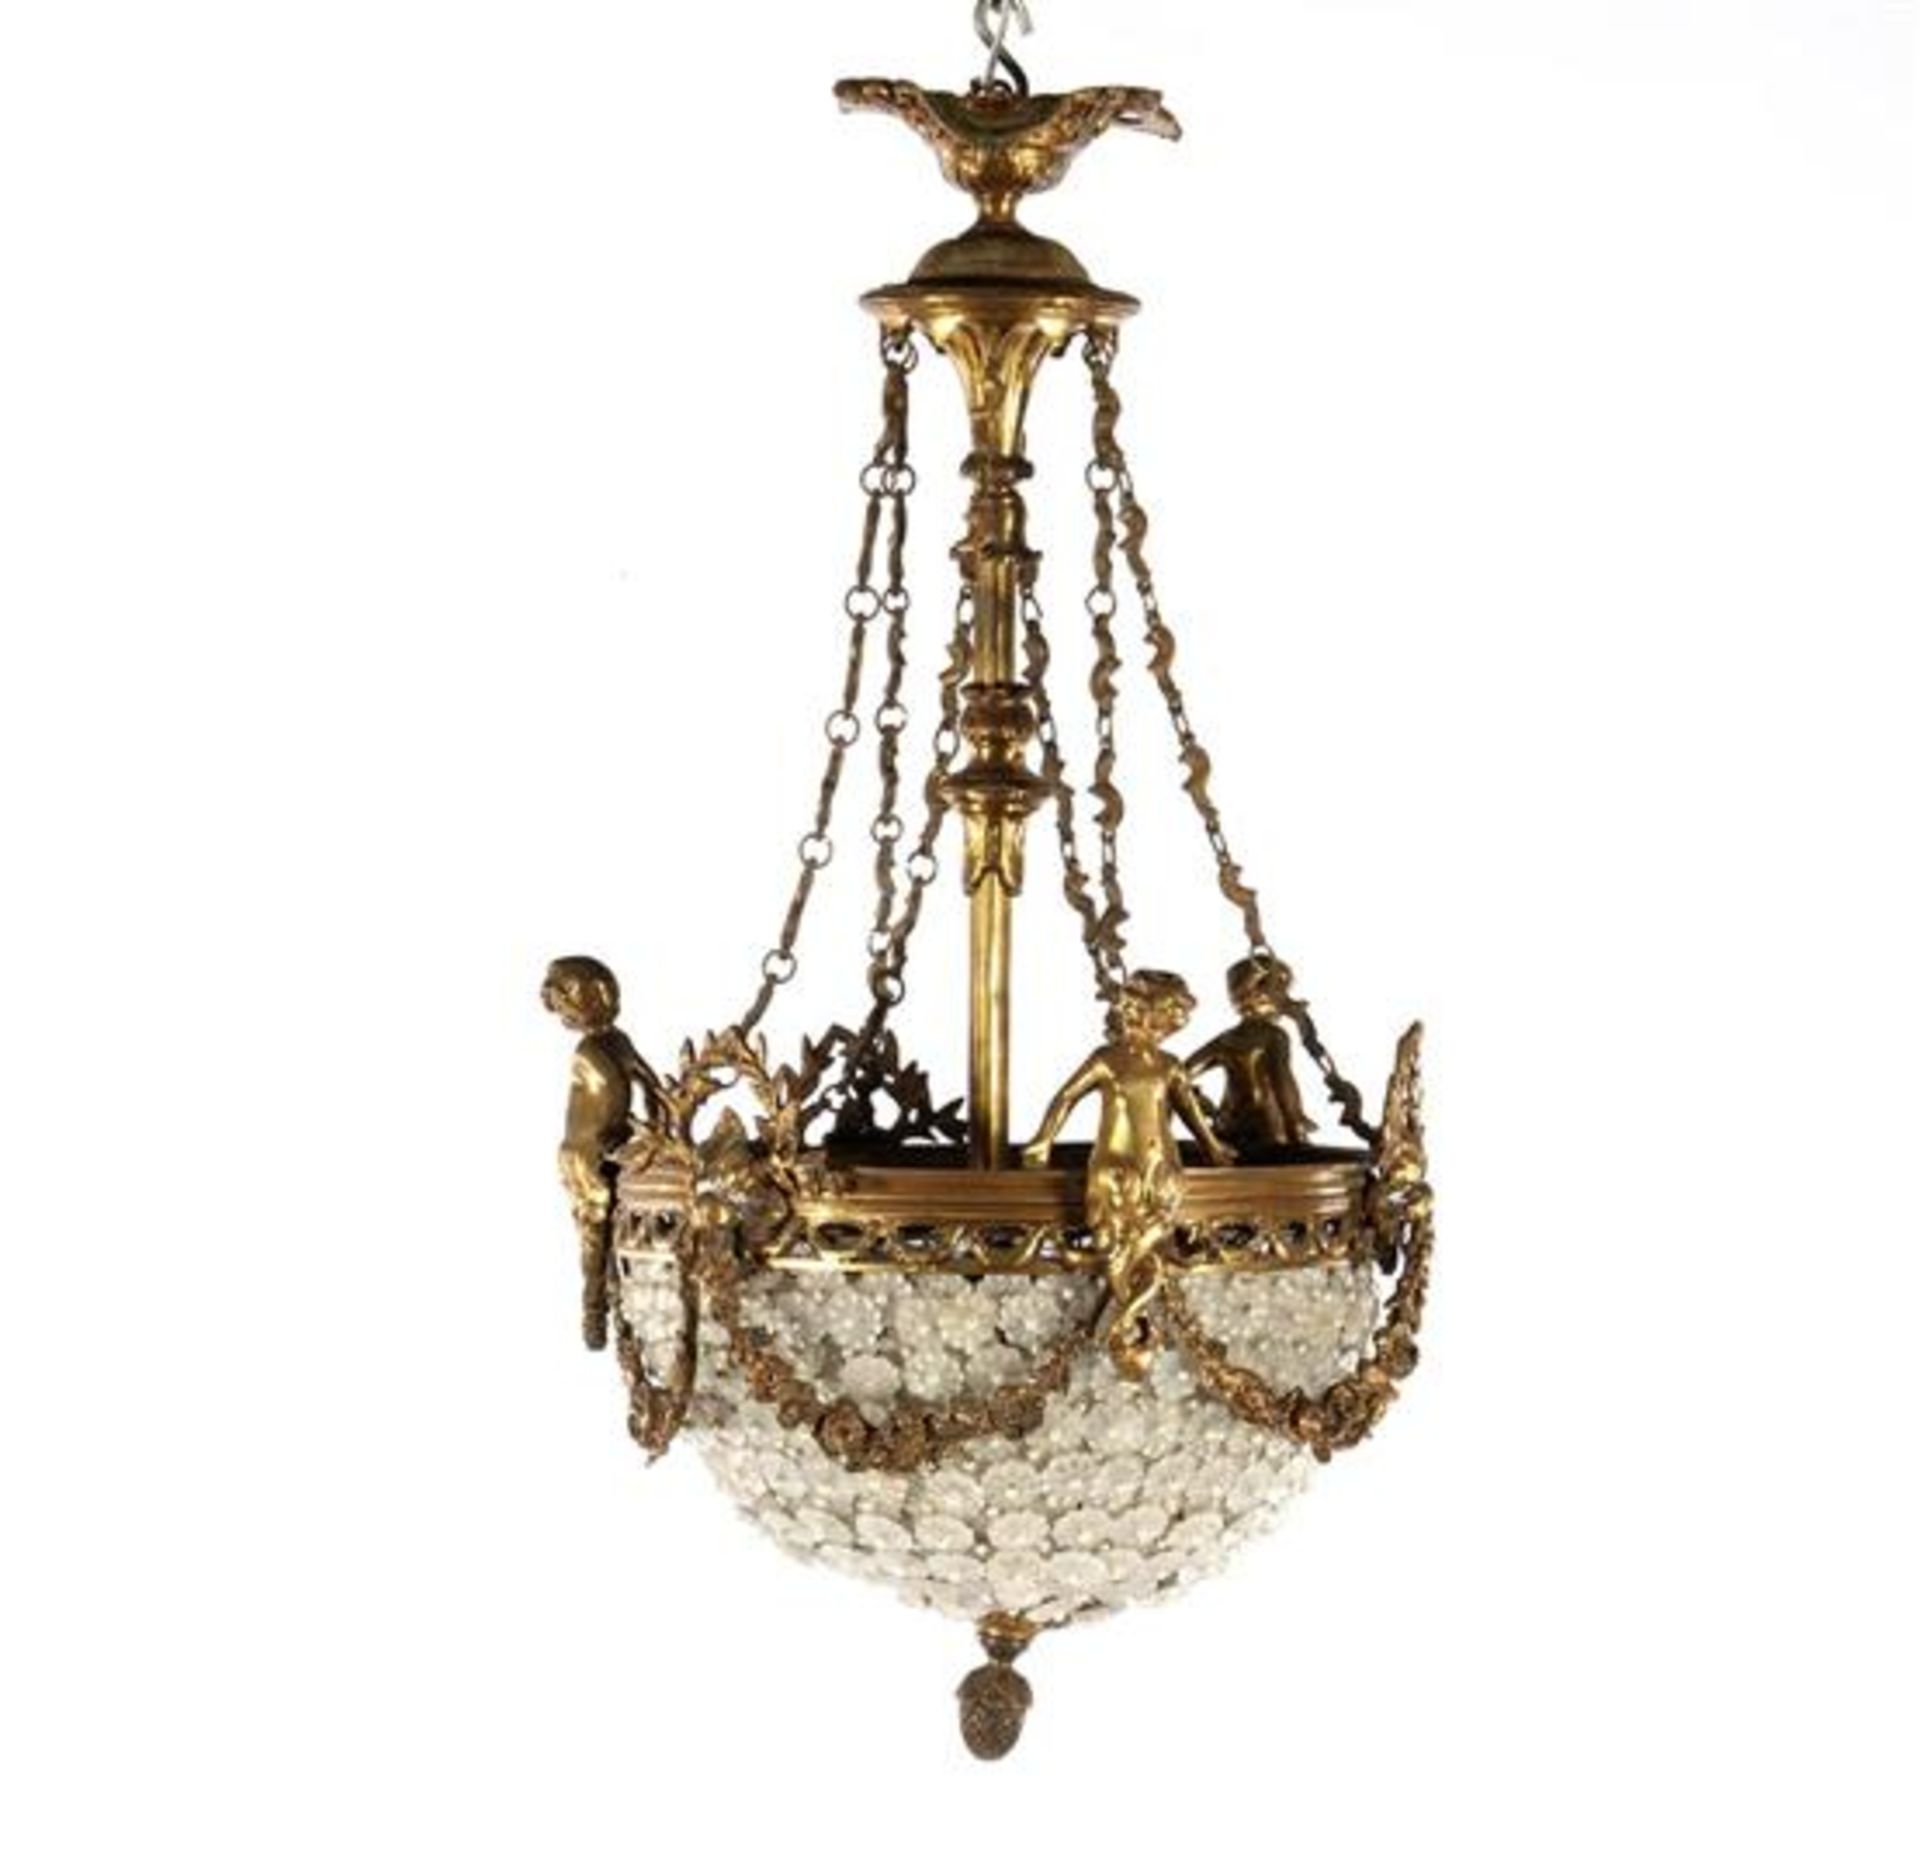 Classic hanging lamp with glass rosettes, 80 cm high